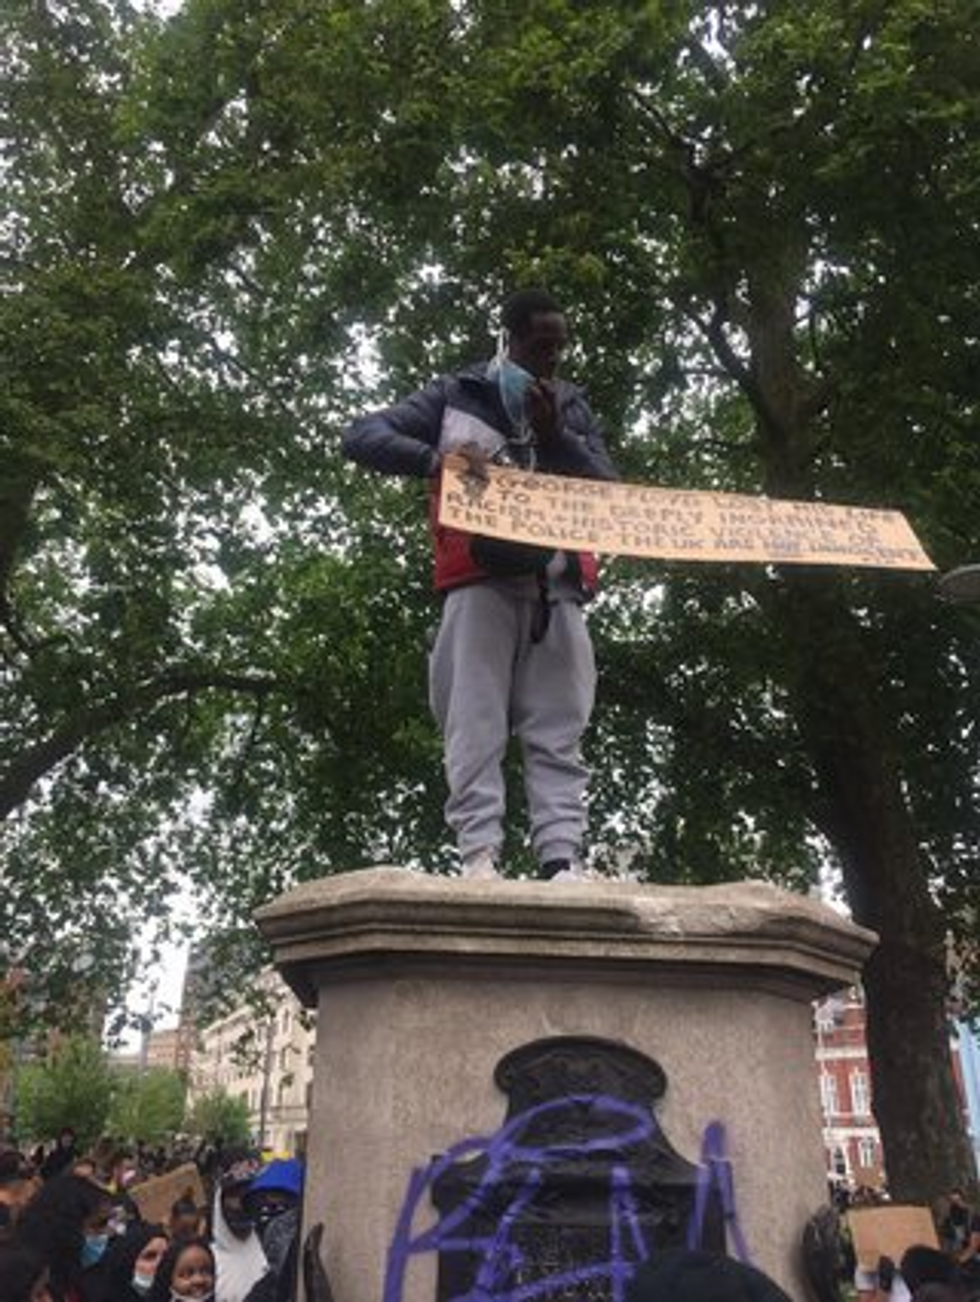 A protester standing on the empty plinth, just vacated by Colston's statue. (Photo: Helen Wilson-Roe)